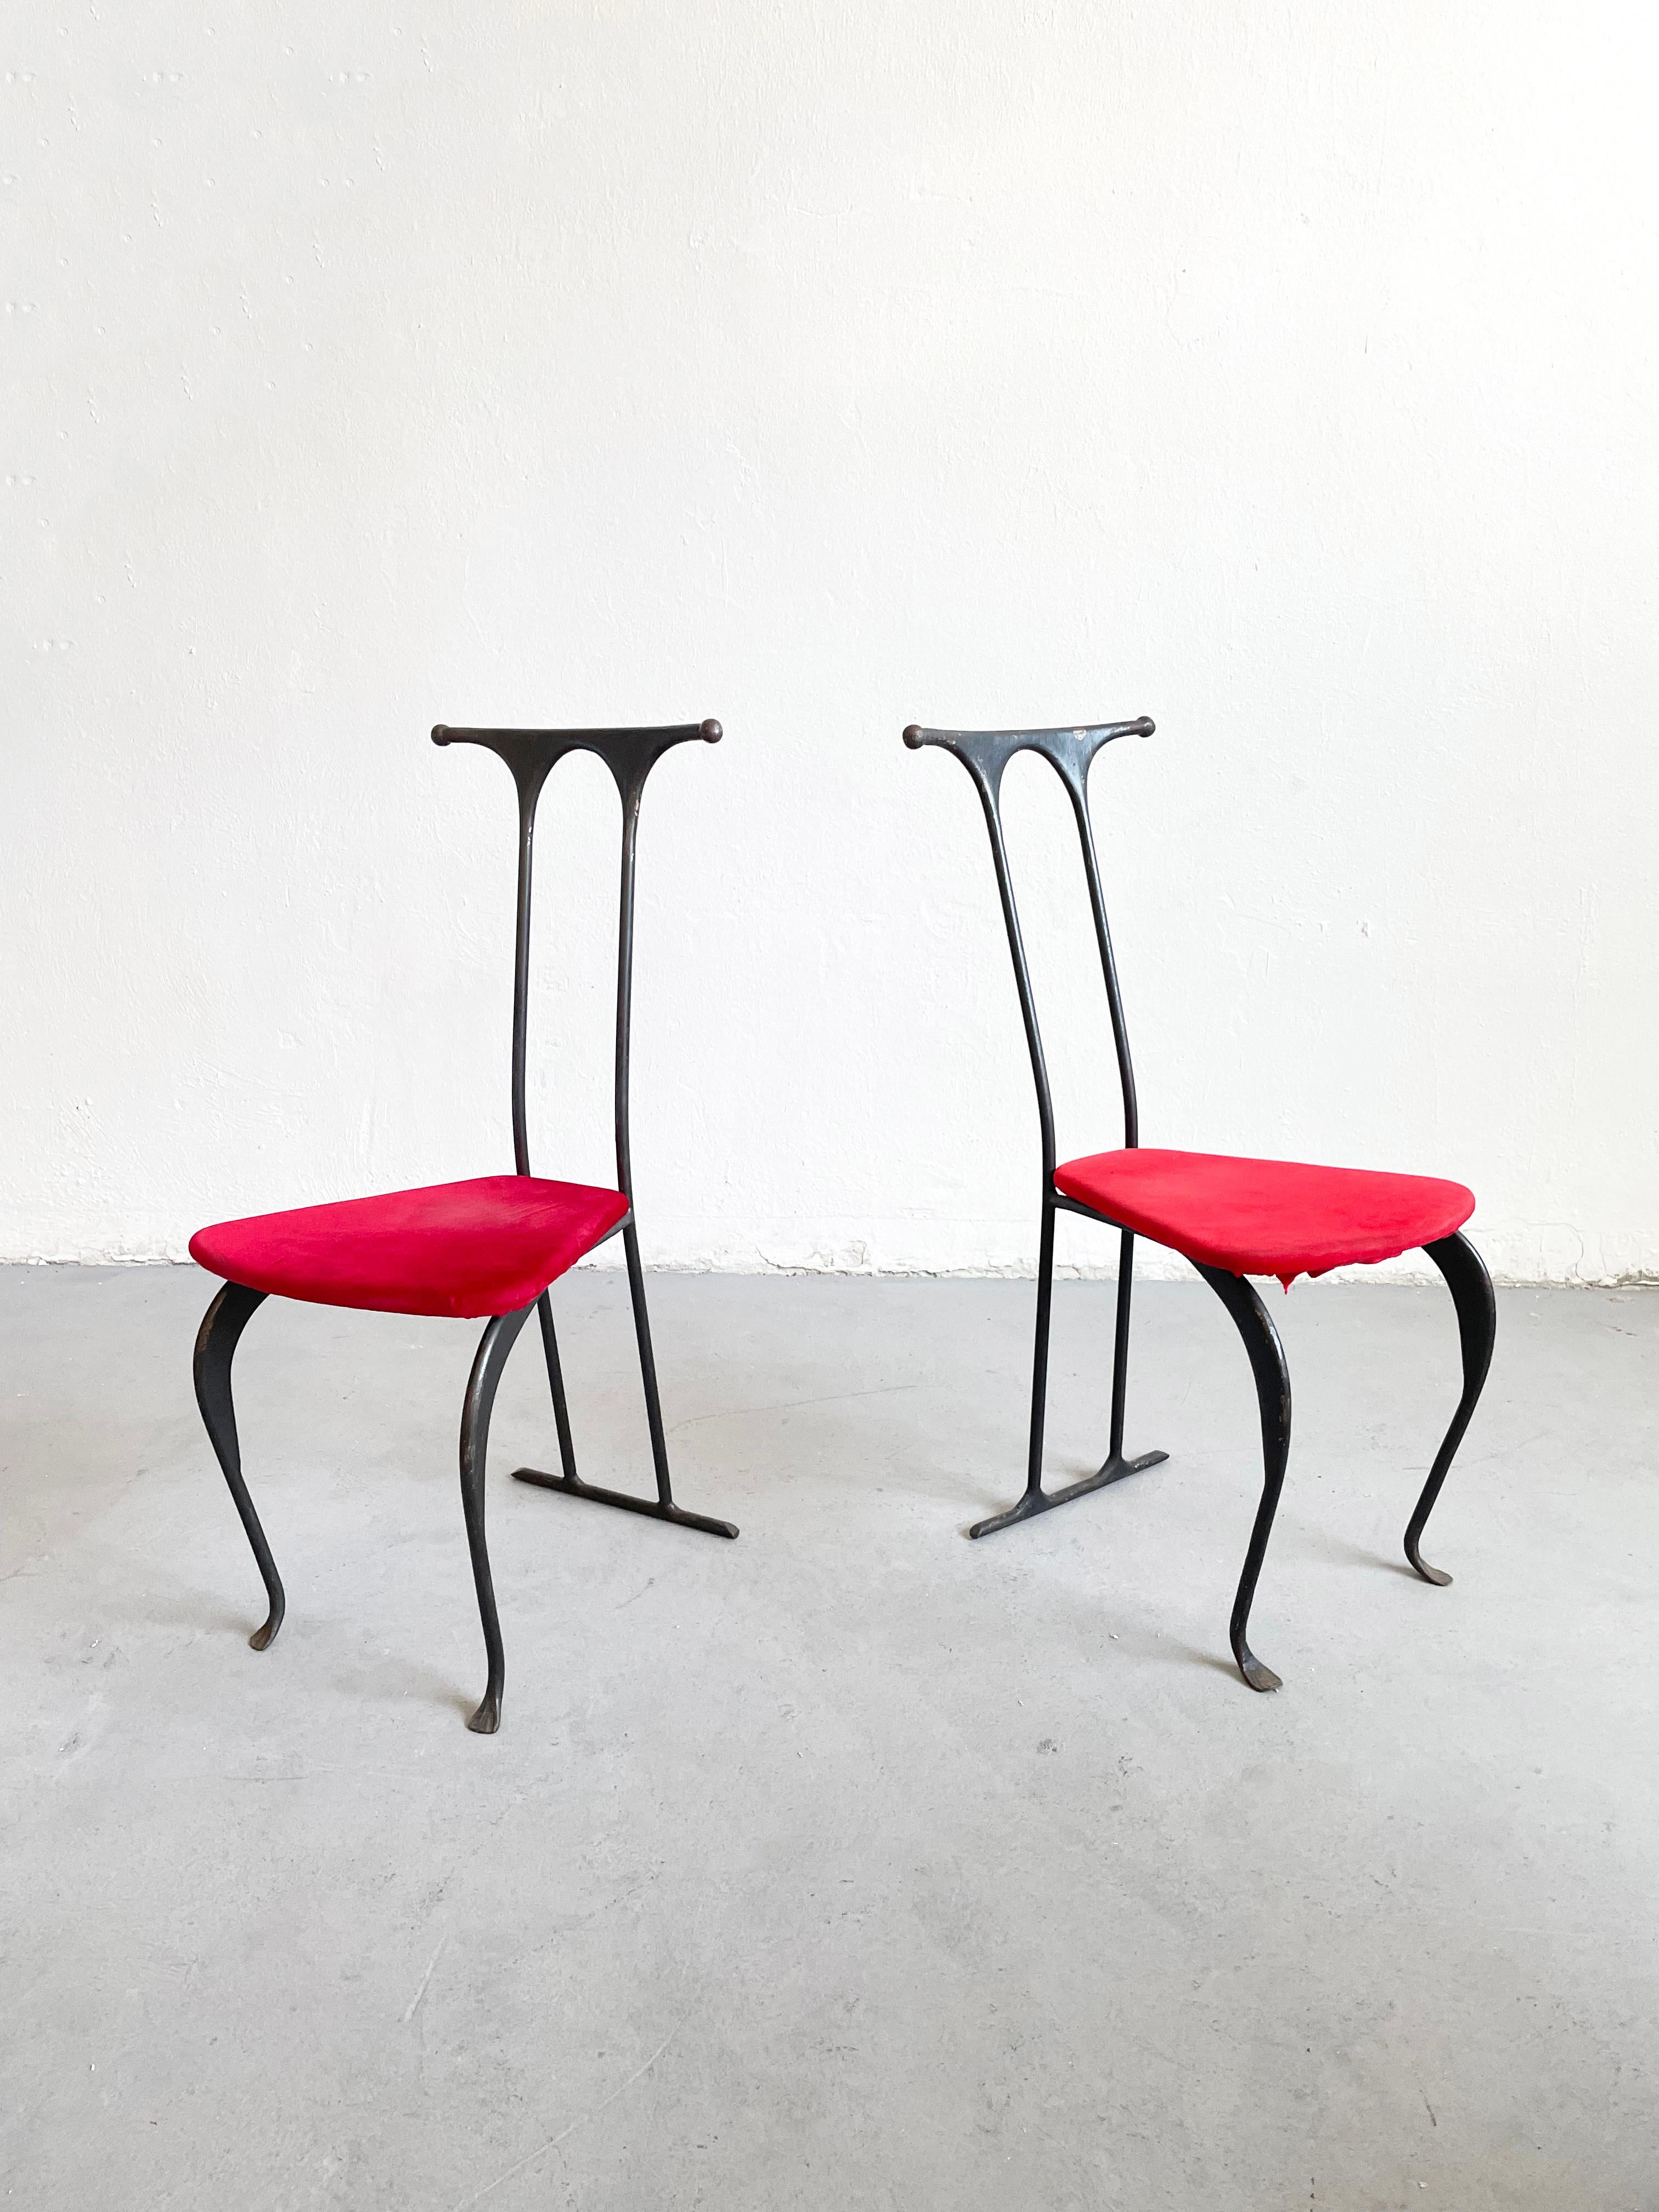 Pair of Postmodern Brutalist Artisanal Wrought Iron Chairs, Poland, 1980s 6